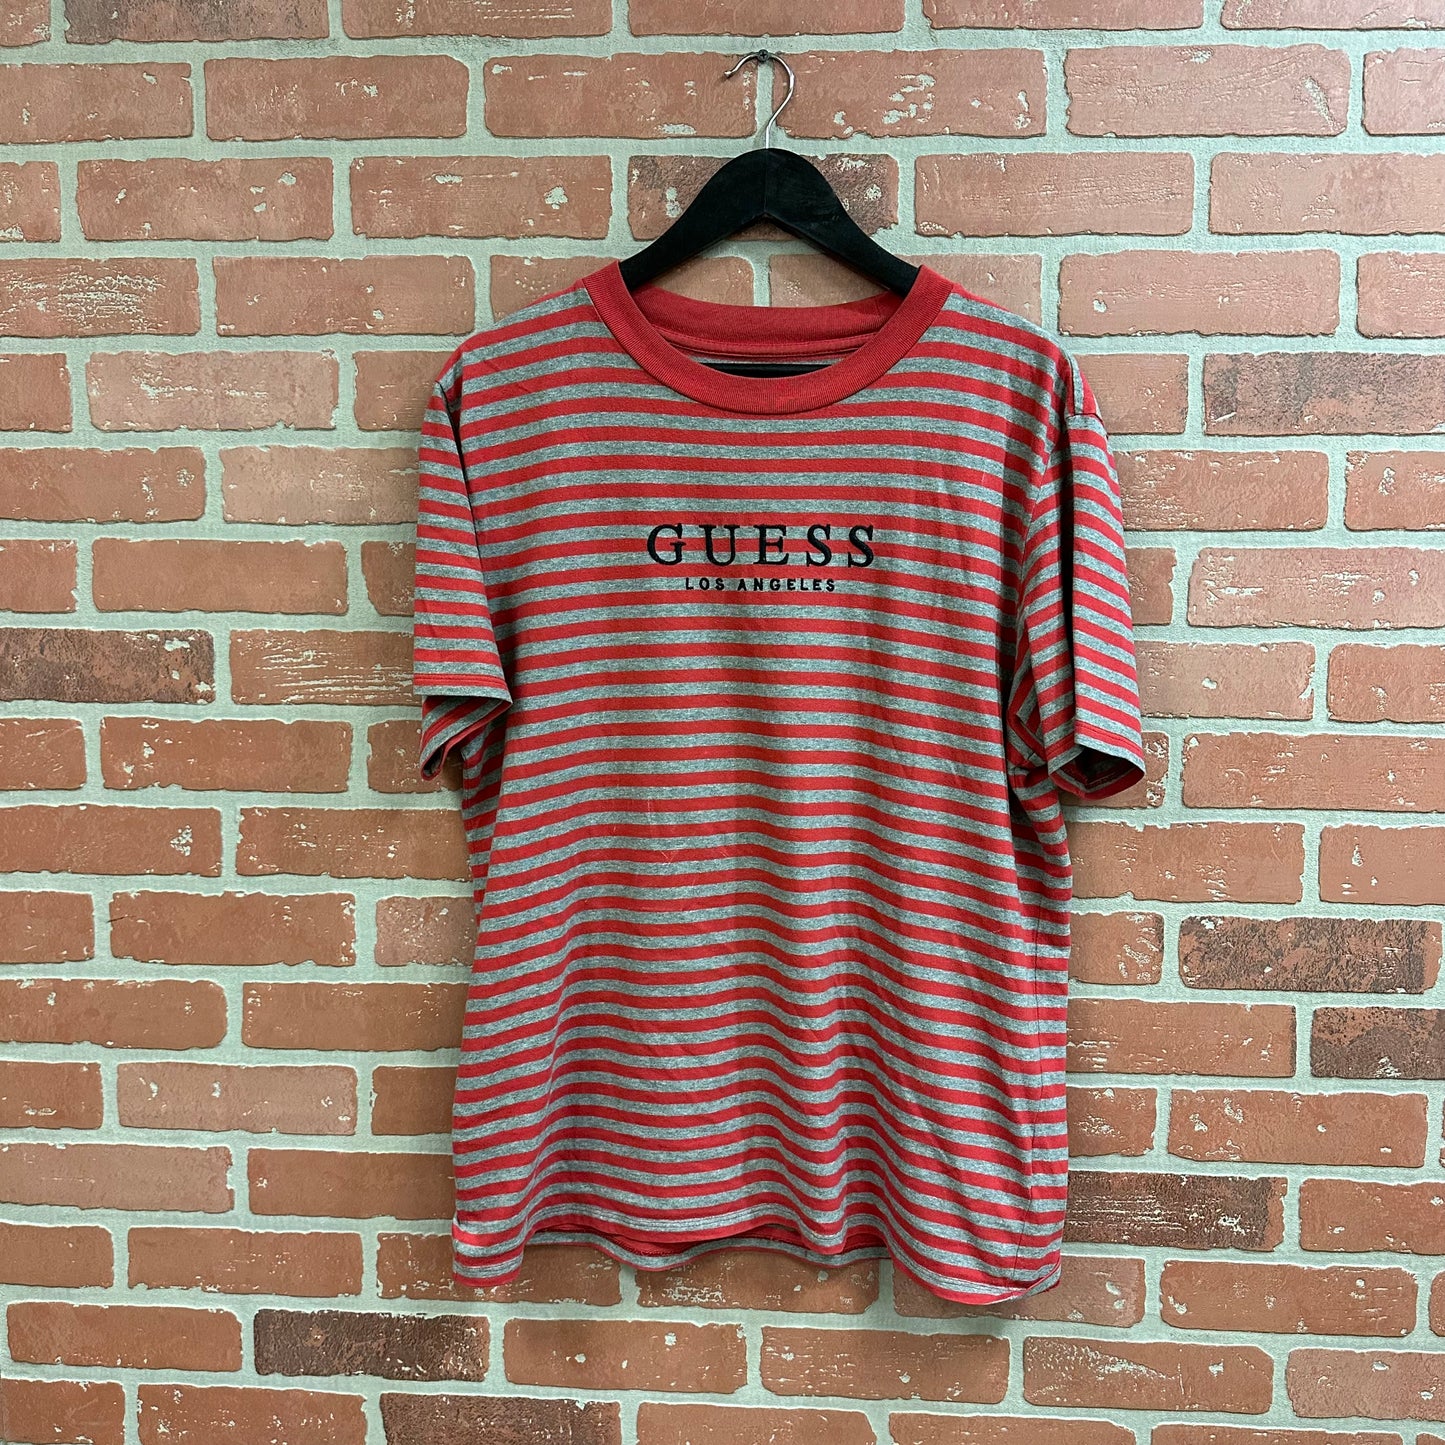 Guess Los Angeles Striped Tee